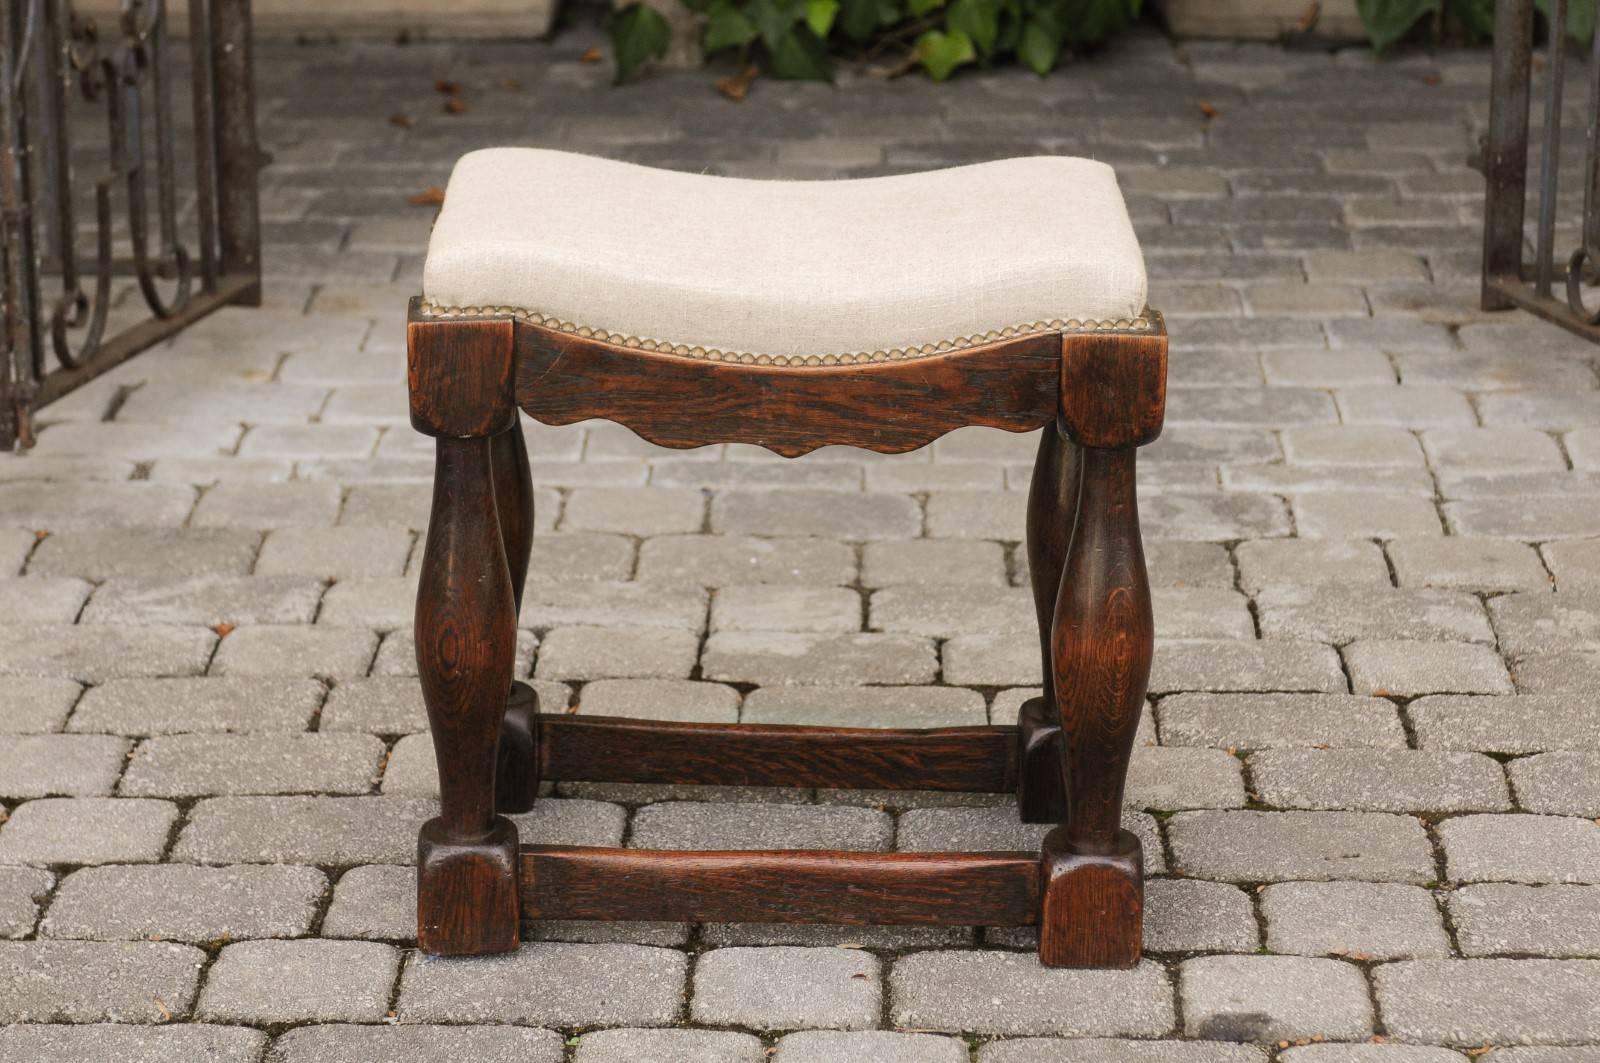 An English oak saddle seat stool from the early 19th century with baluster legs, side stretchers, new upholstery and brass nailheads. This English oak stool features an exquisite saddle seat, covered with a new linen upholstery, accented with a